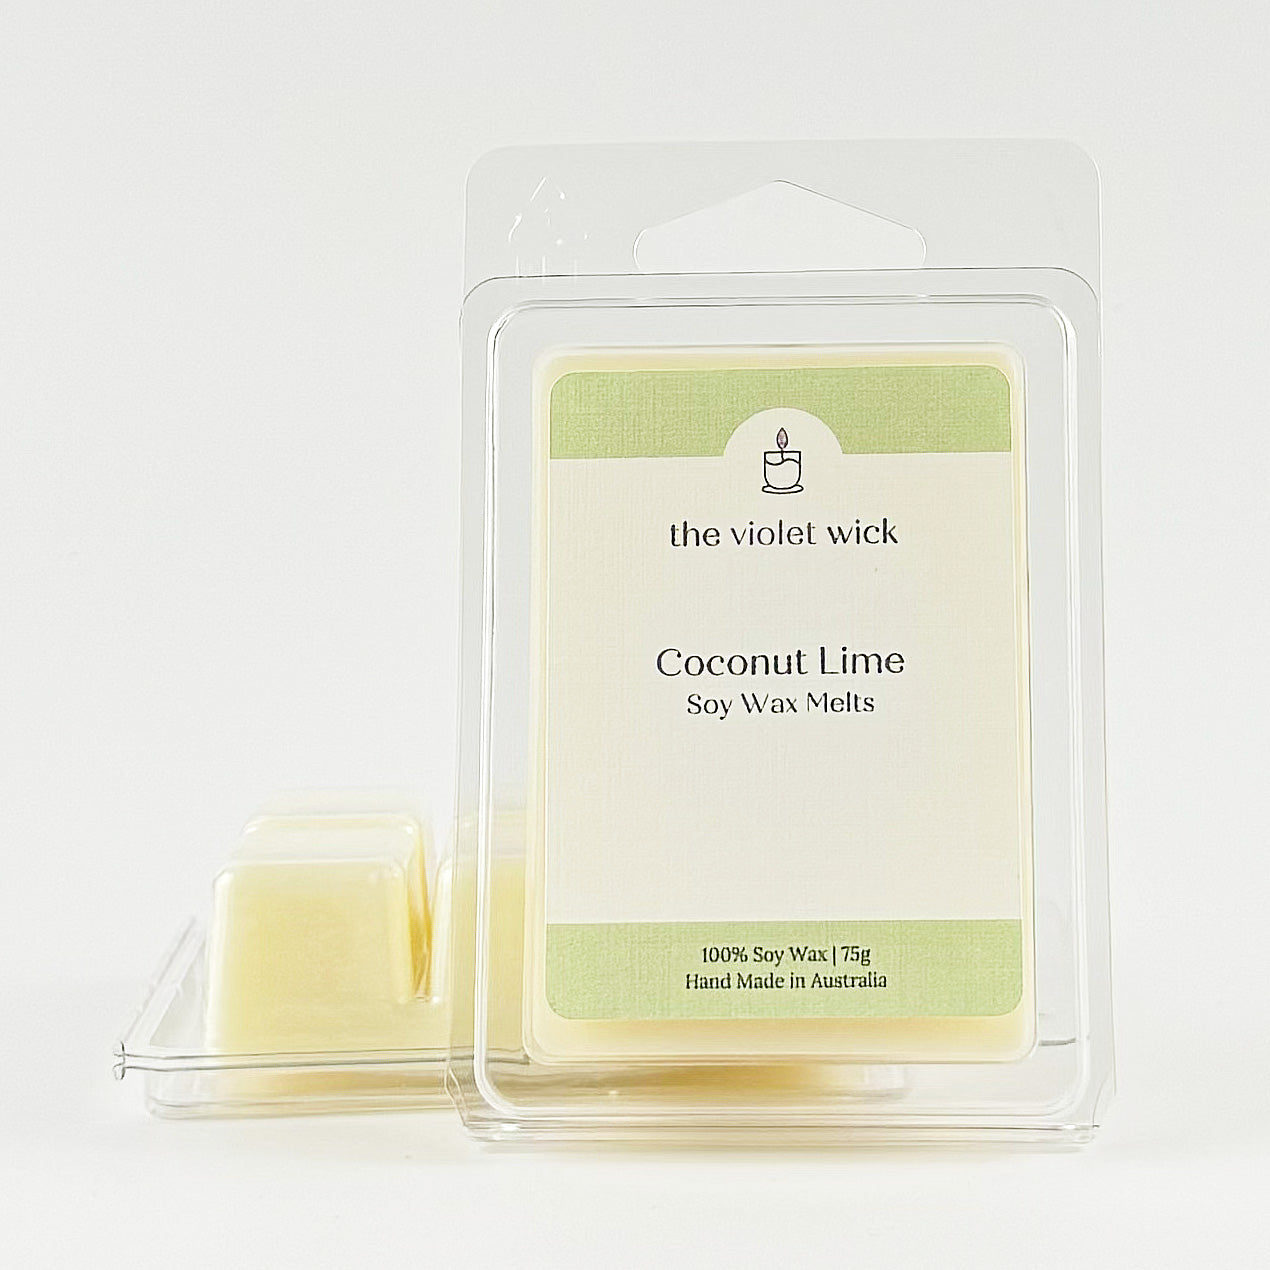 Coconut Lime Soy Wax Melt from The Violet Wick